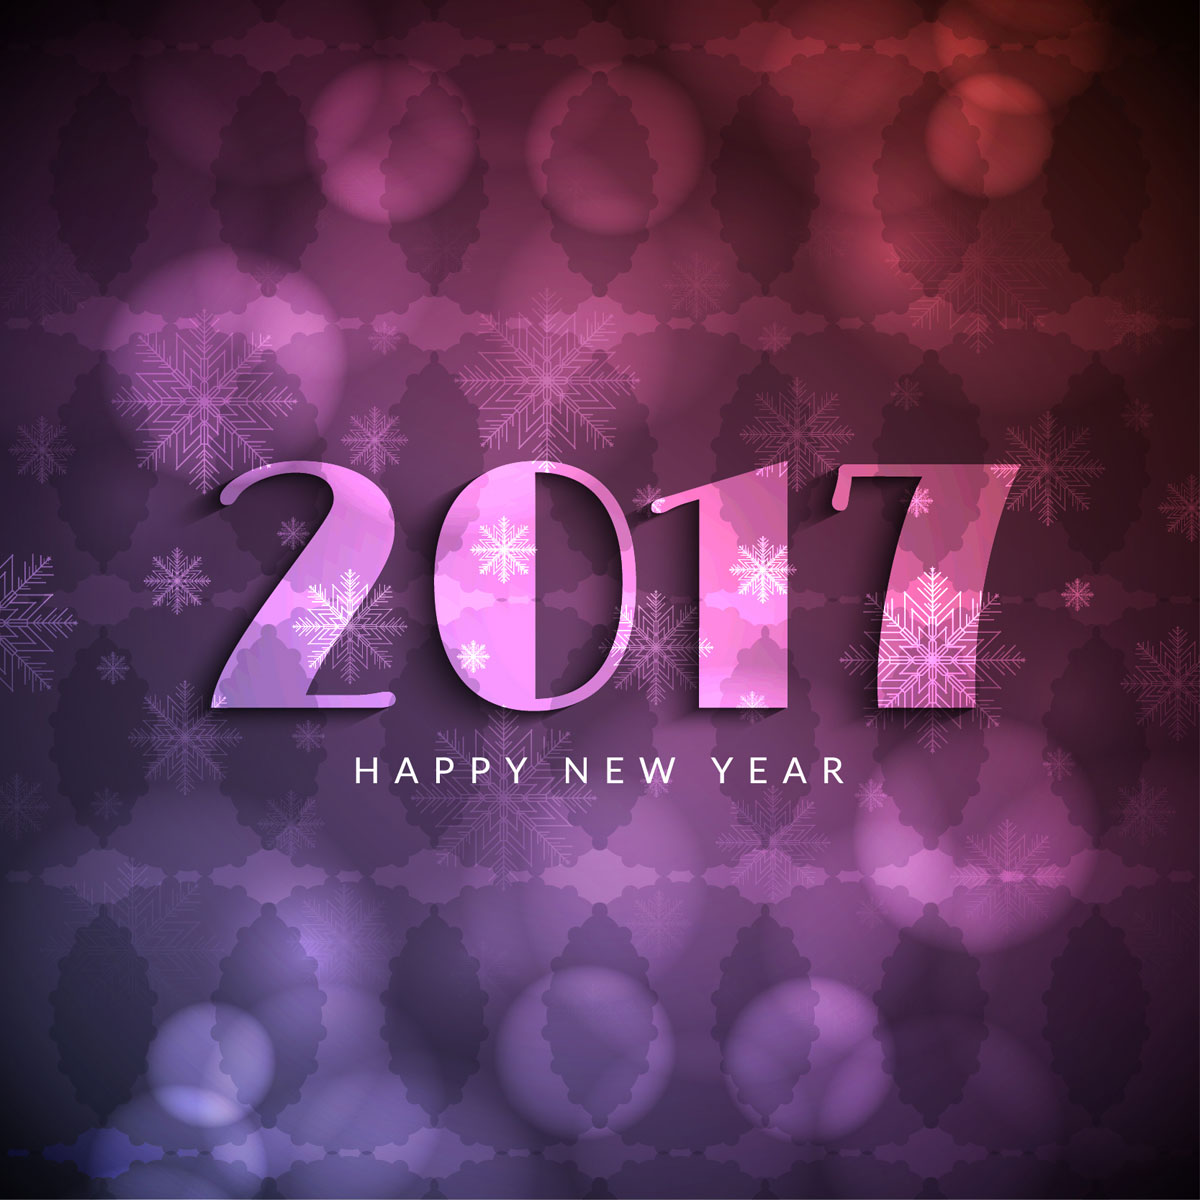 Happy New Year 2017 Cards Free Download Happy New Year 2018